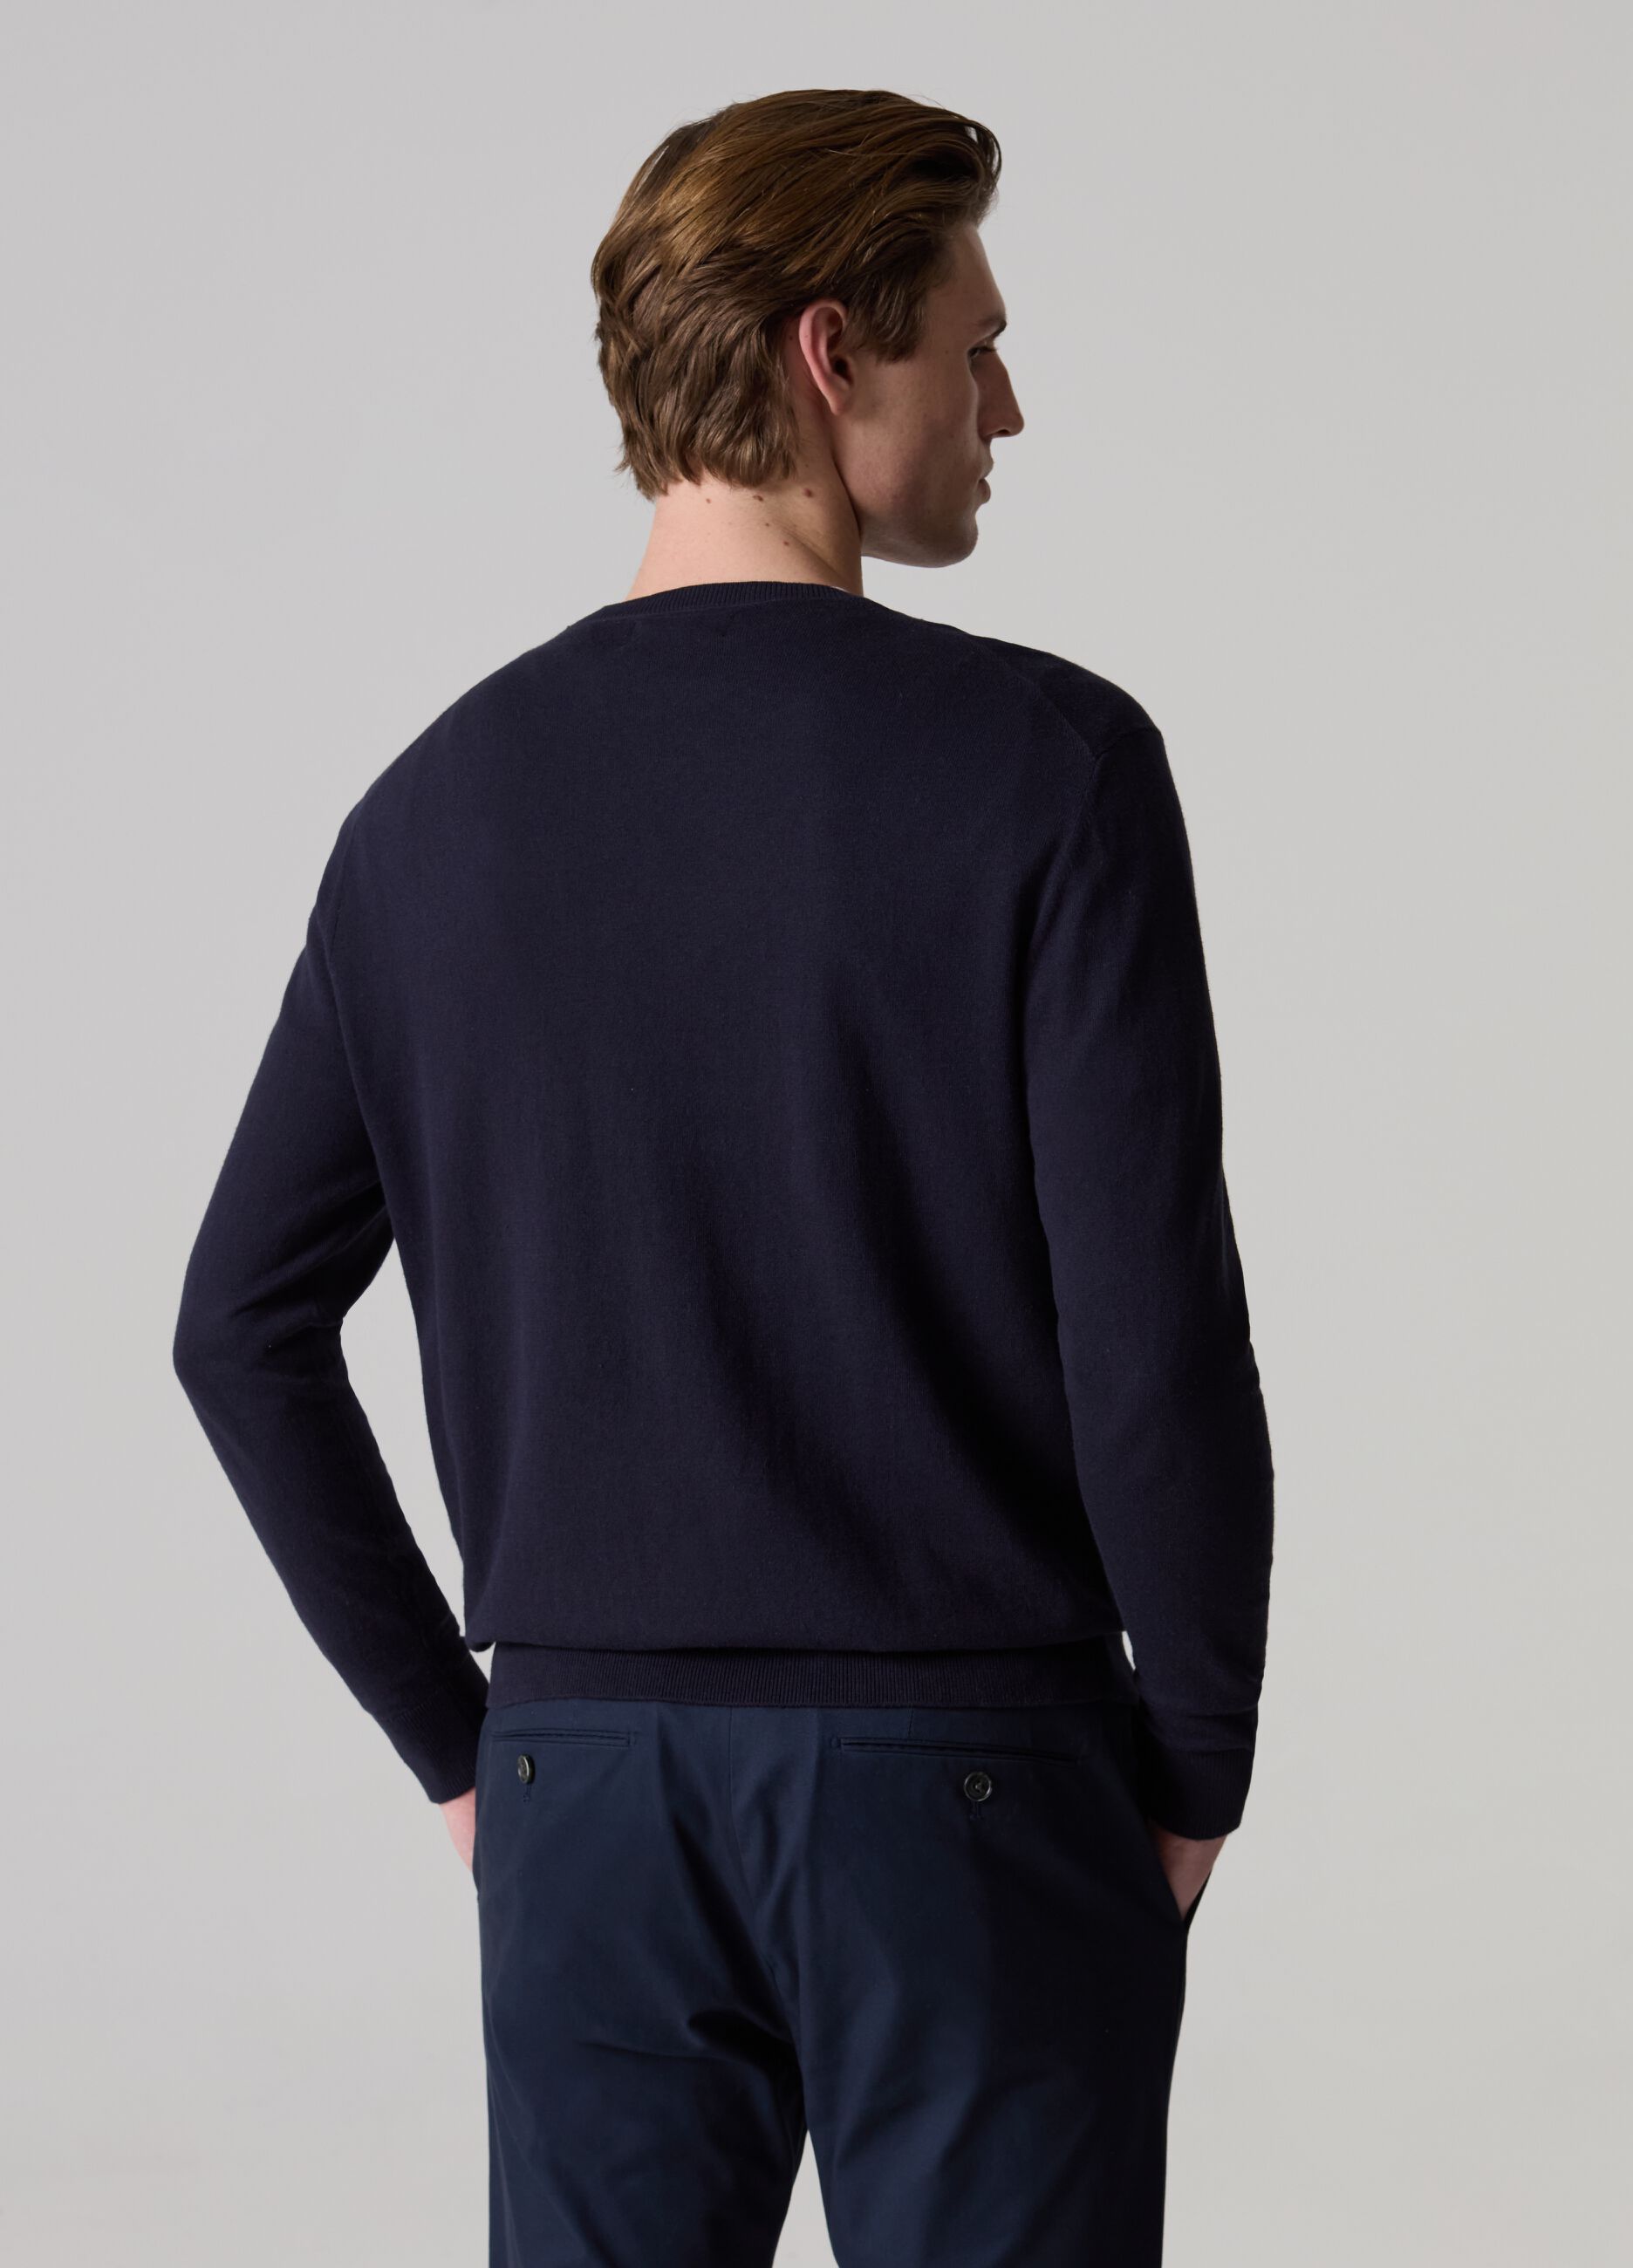 Contemporary pullover in cotton and hemp